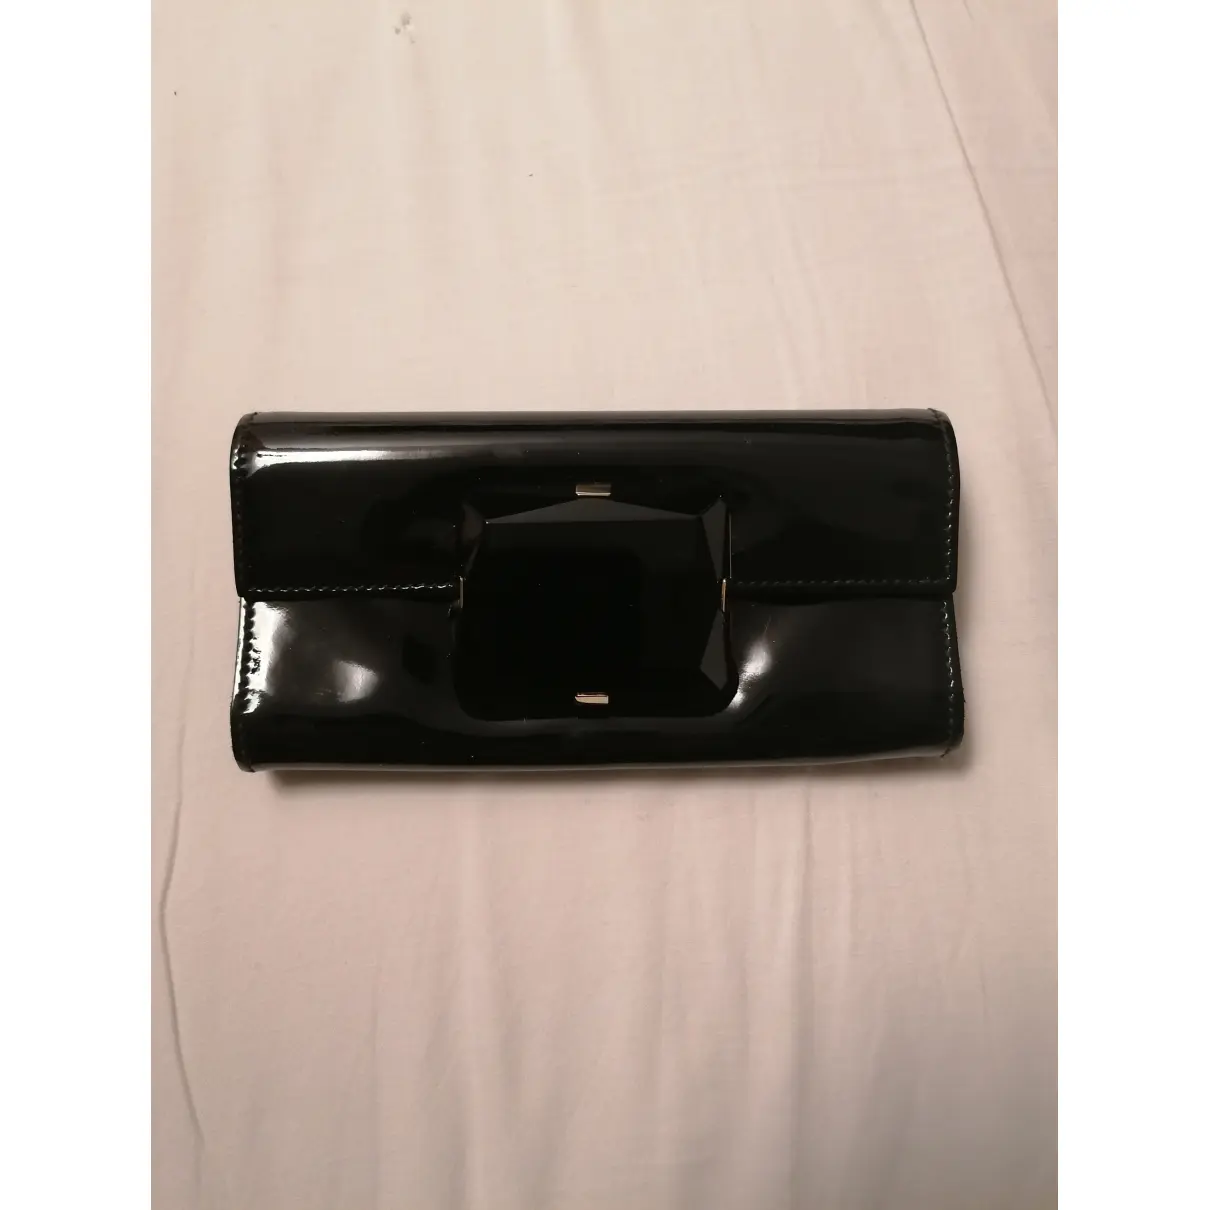 Buy Gucci Patent leather clutch bag online